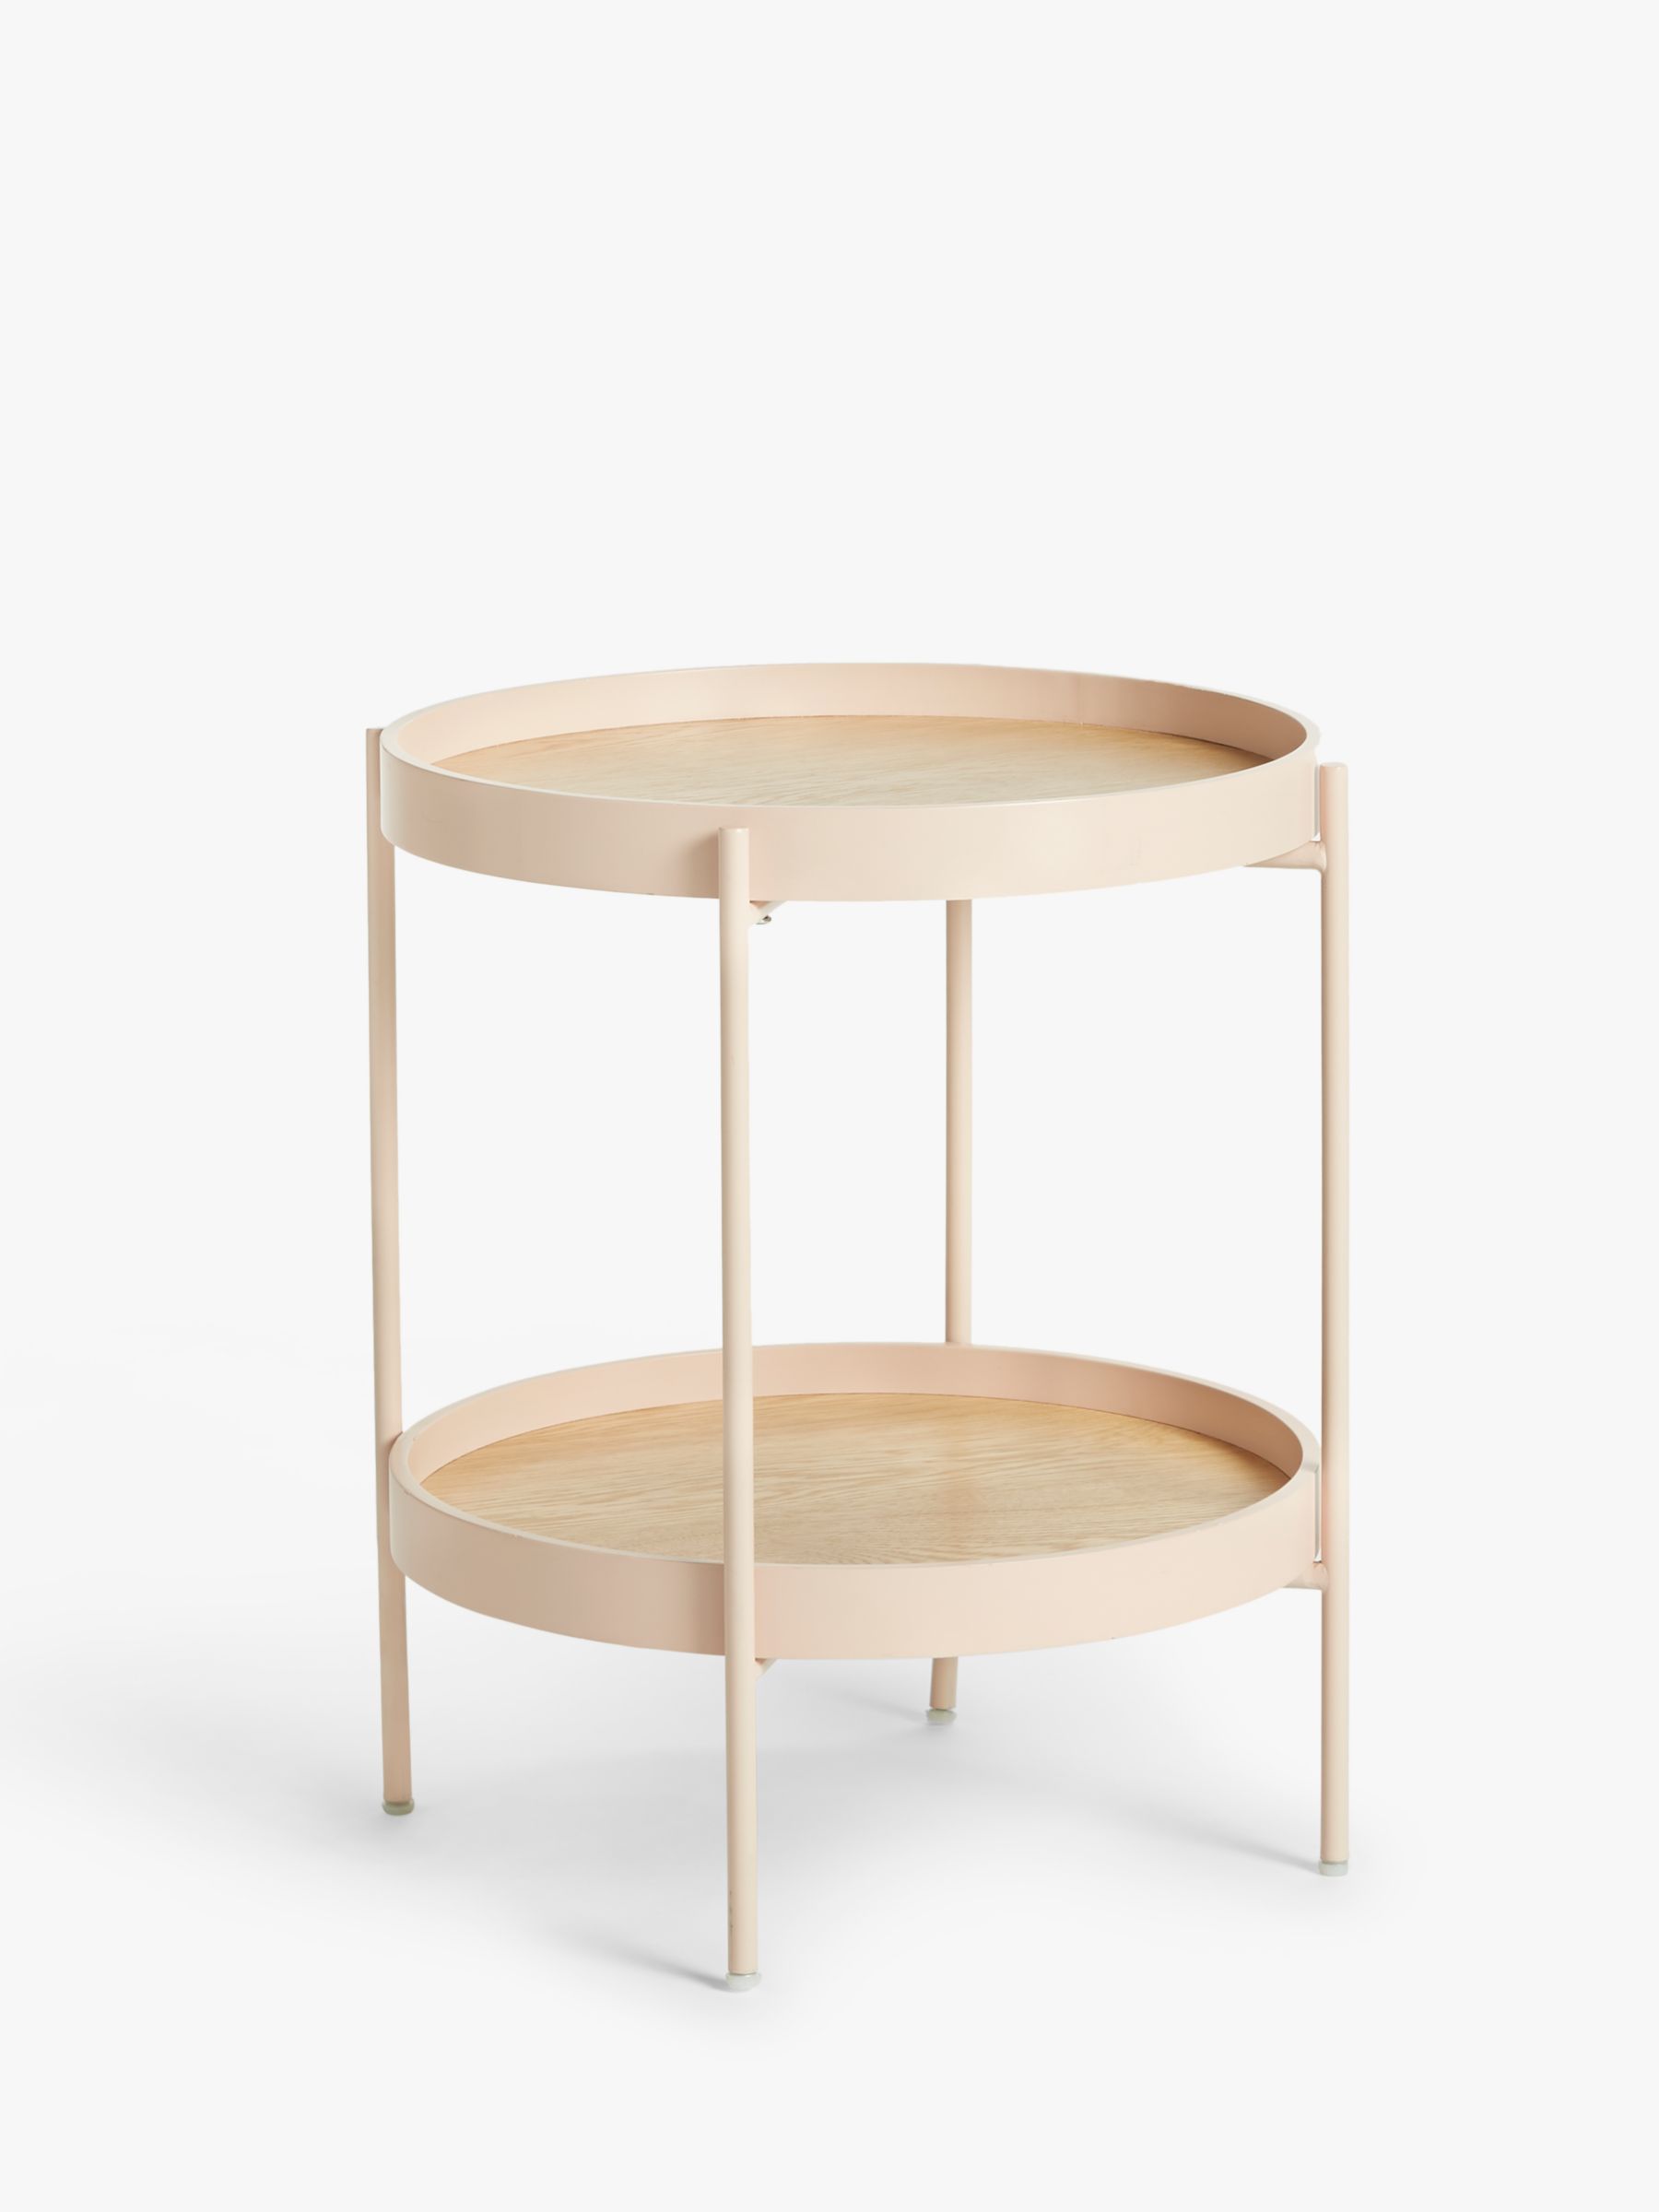 Photo of John lewis anyday jax large side table